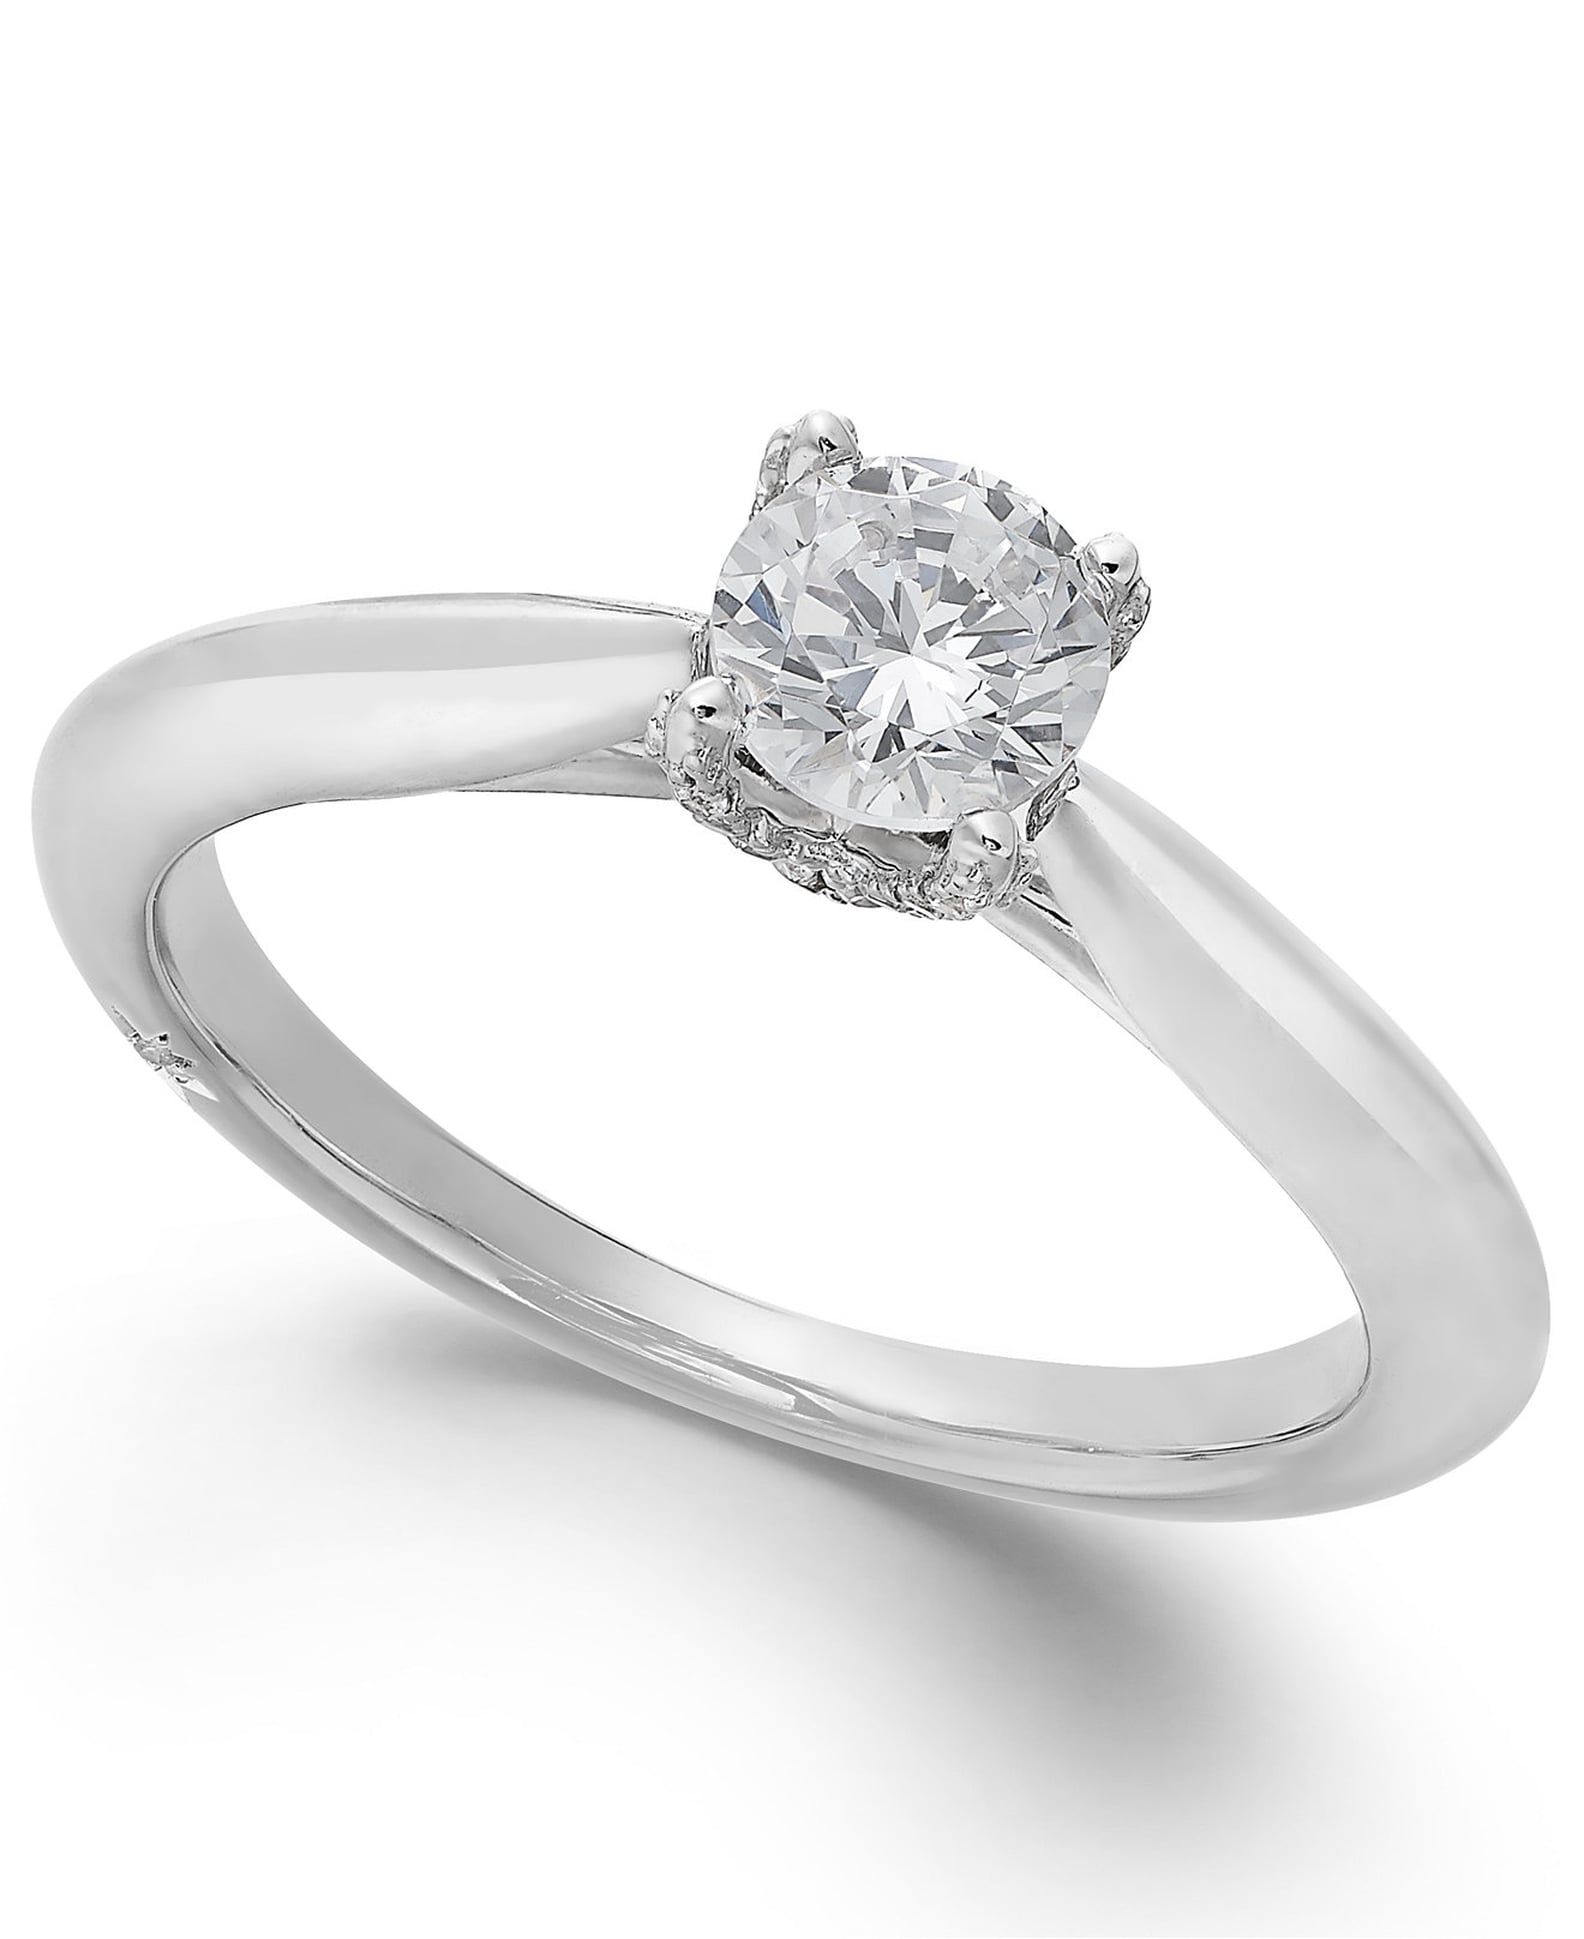 Engagement Rings by Personality Type | POPSUGAR Fashion